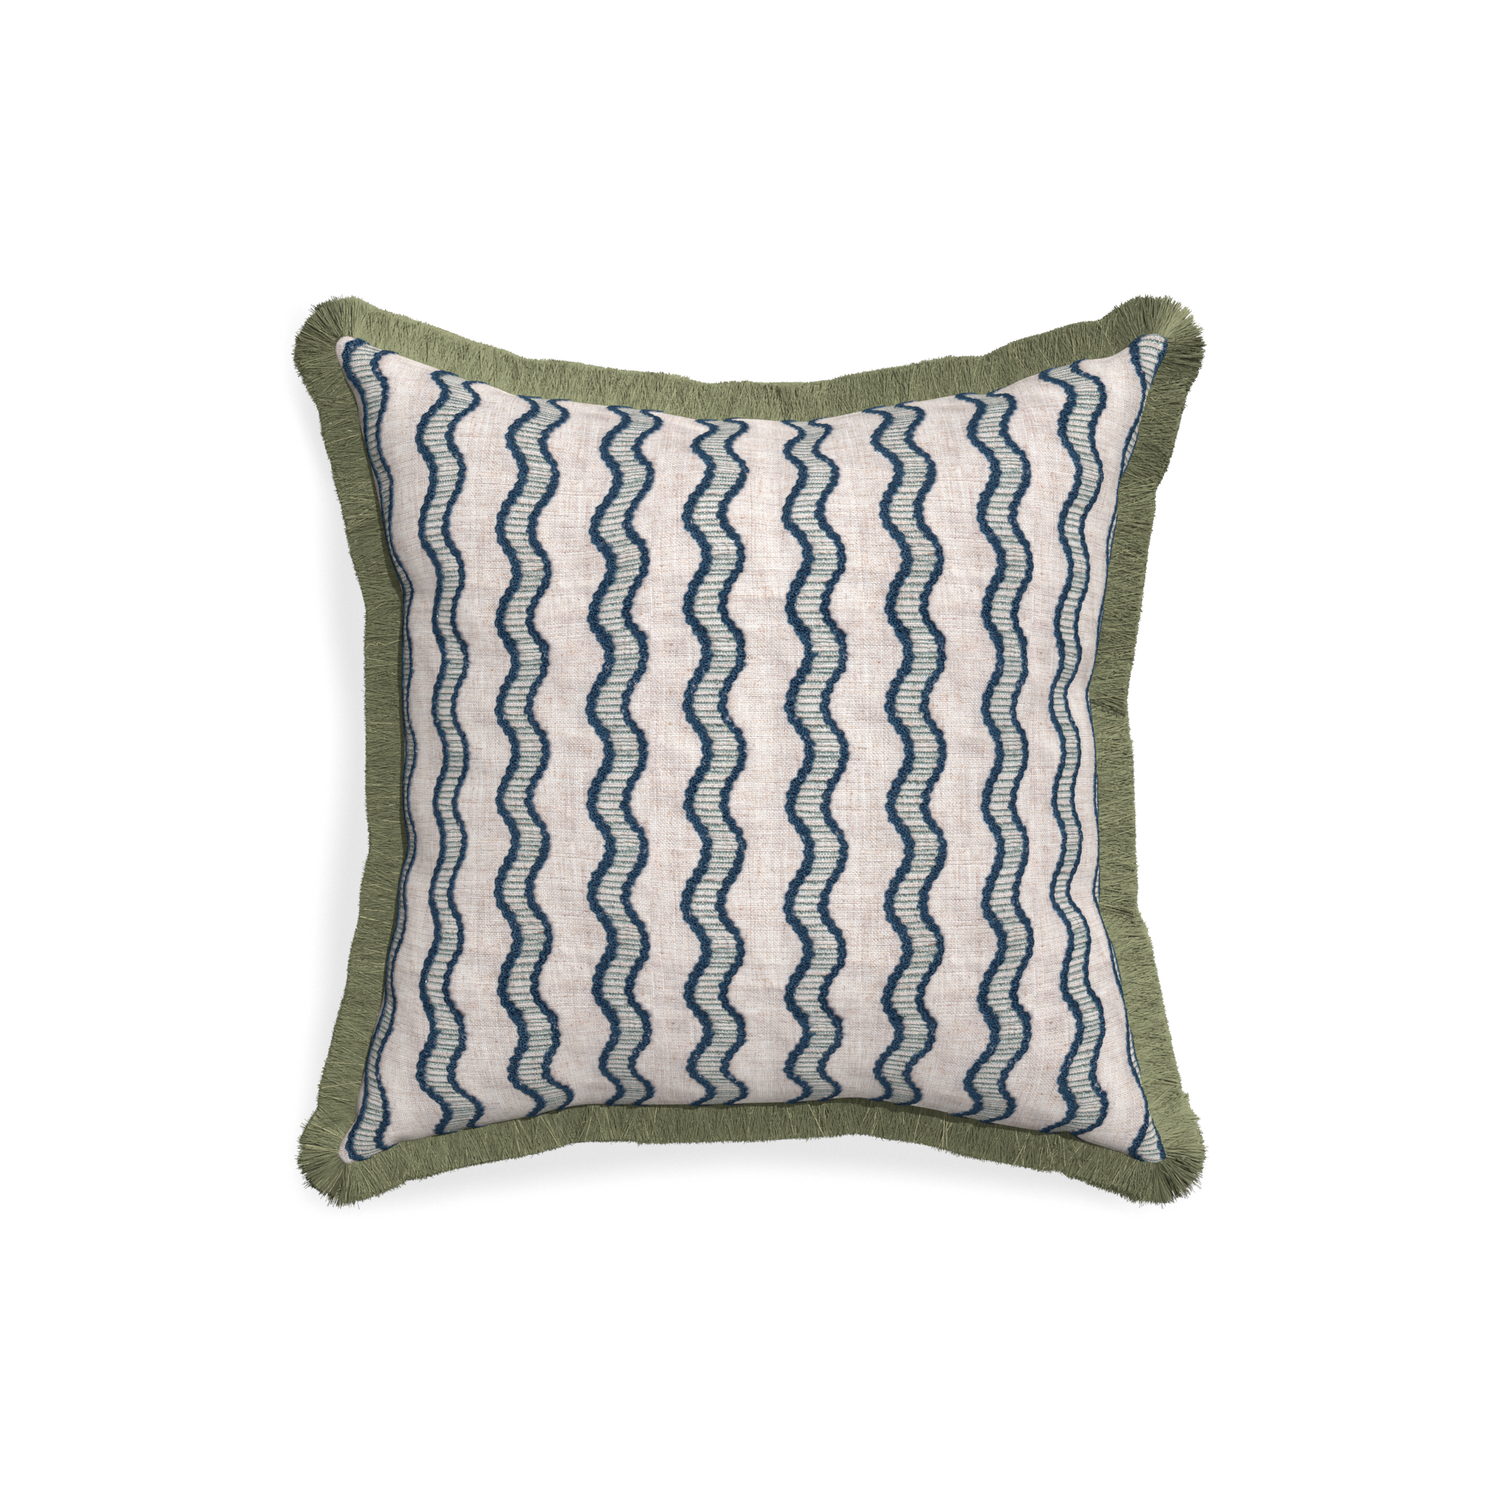 18-square beatrice custom embroidered wavepillow with sage fringe on white background